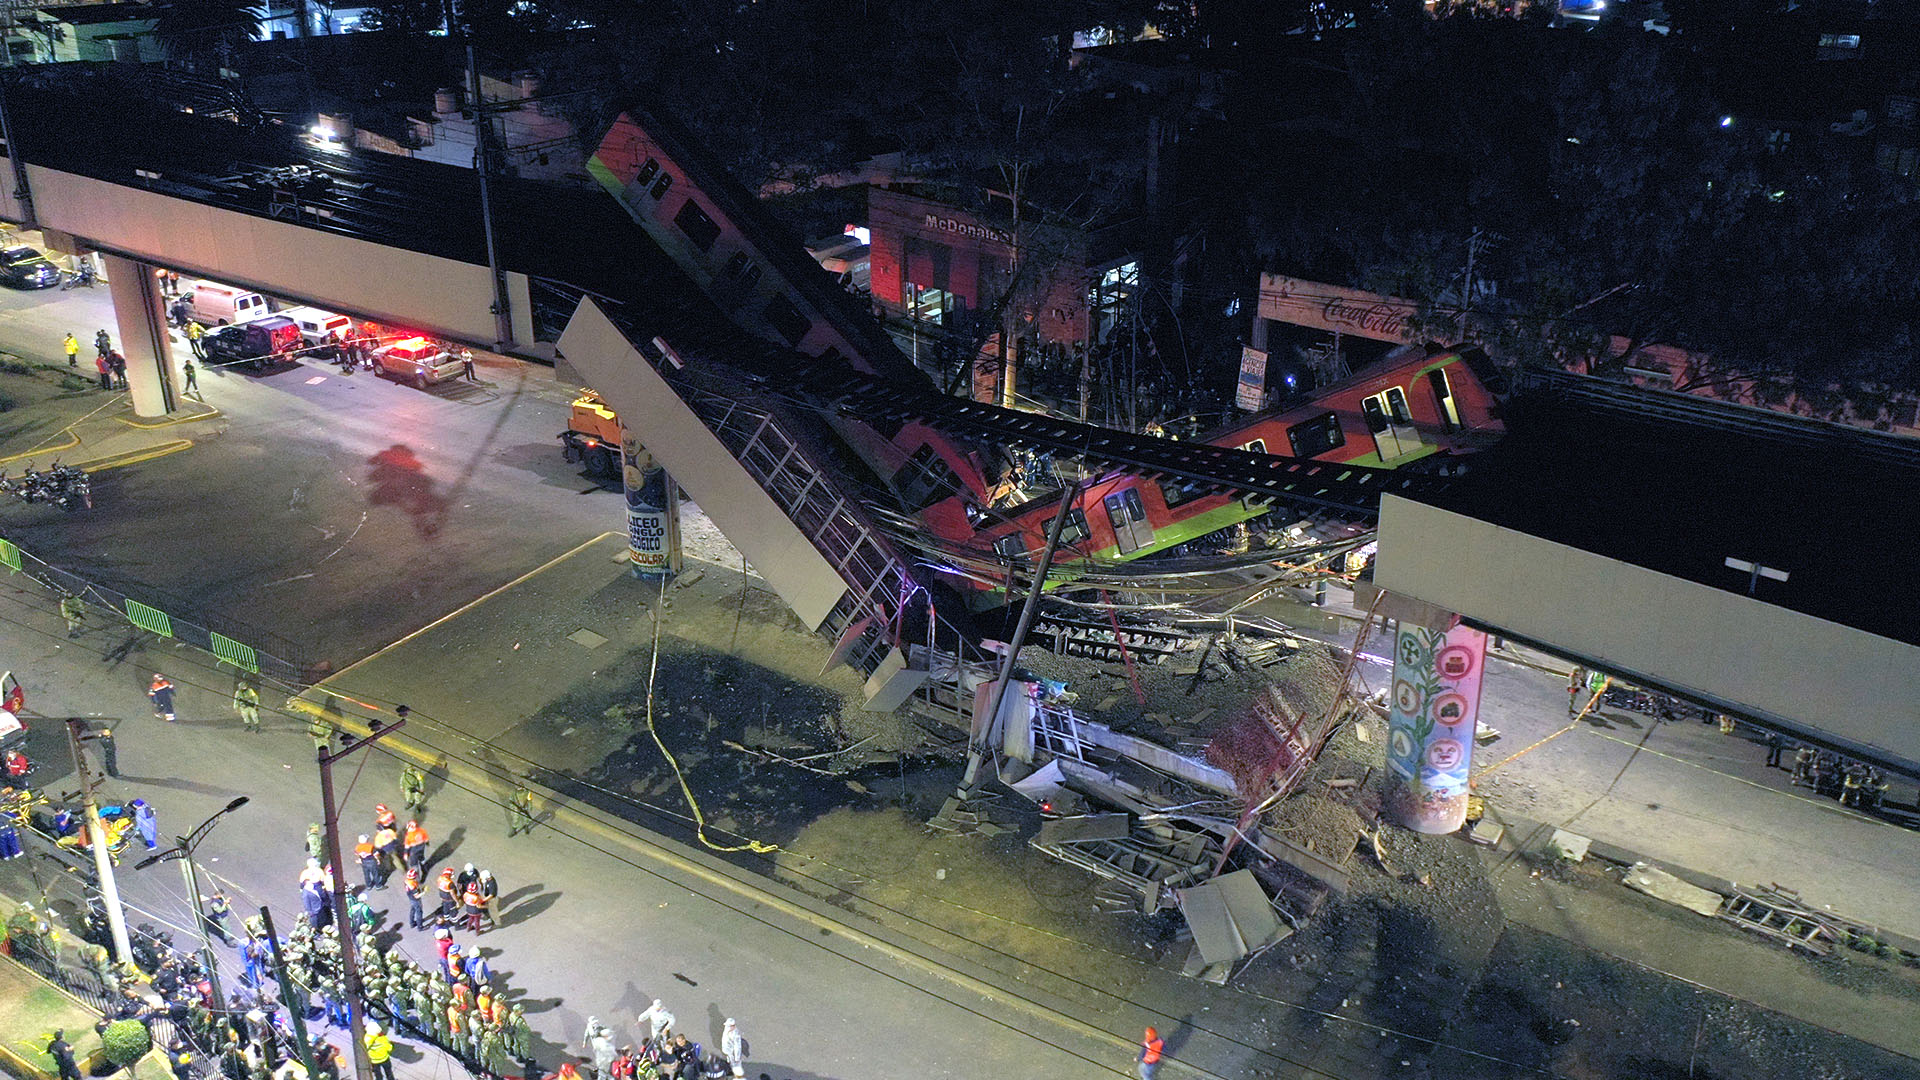 An aerial view shows rescue workers at the site of a metro train accident after an overpass for a metro partially collapsed in Mexico City on May 3, 2021. - At least 15 people were killed and dozens injured when an elevated metro line collapsed in the Mexican capital on May 3 as a train was passing, authorities said. (Photo by PEDRO PARDO / AFP)